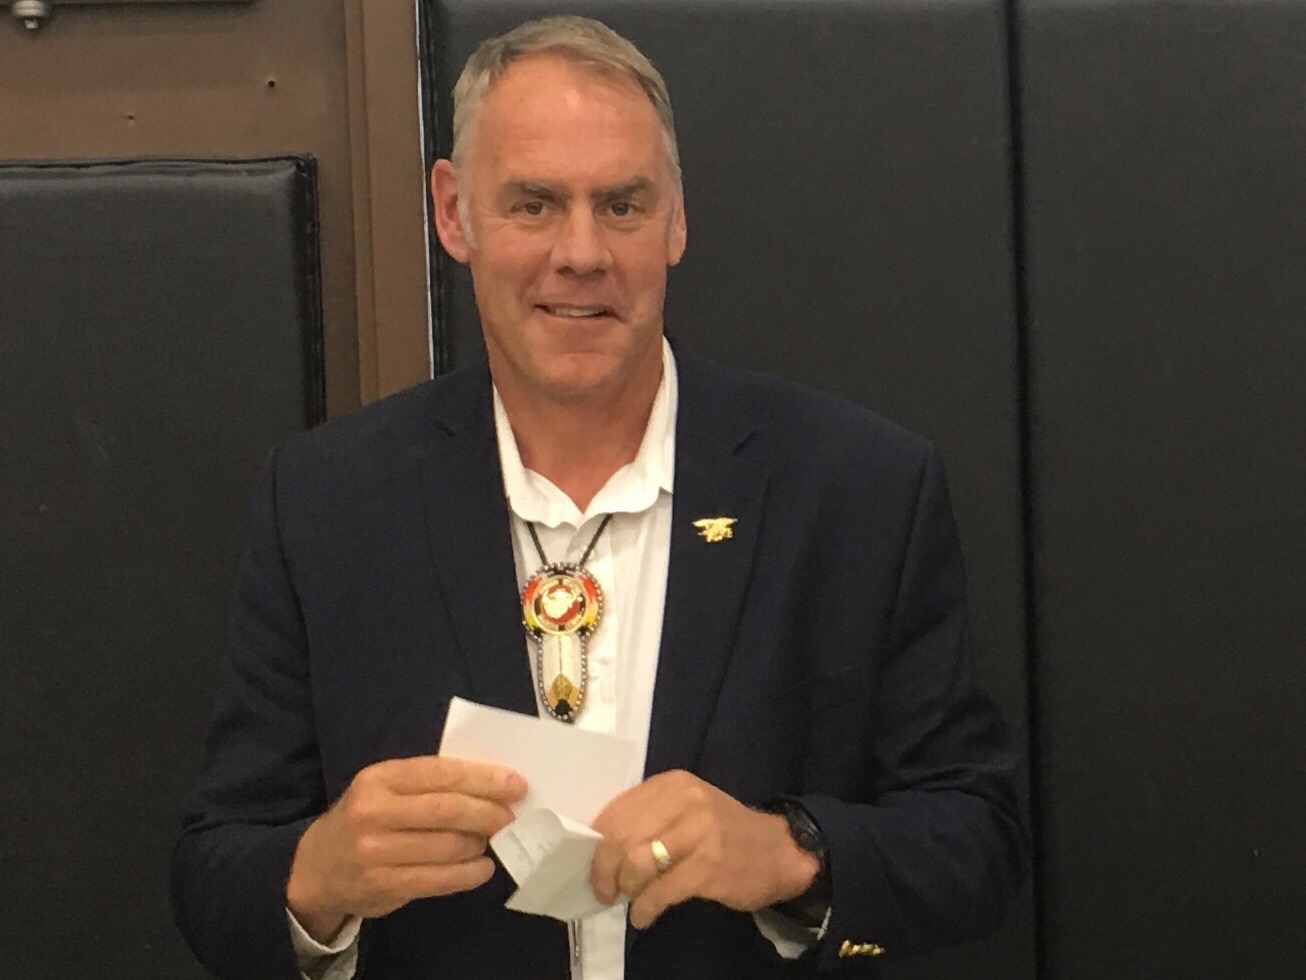 Mark Trahant: Ryan Zinke is a much better pick for Indian Country